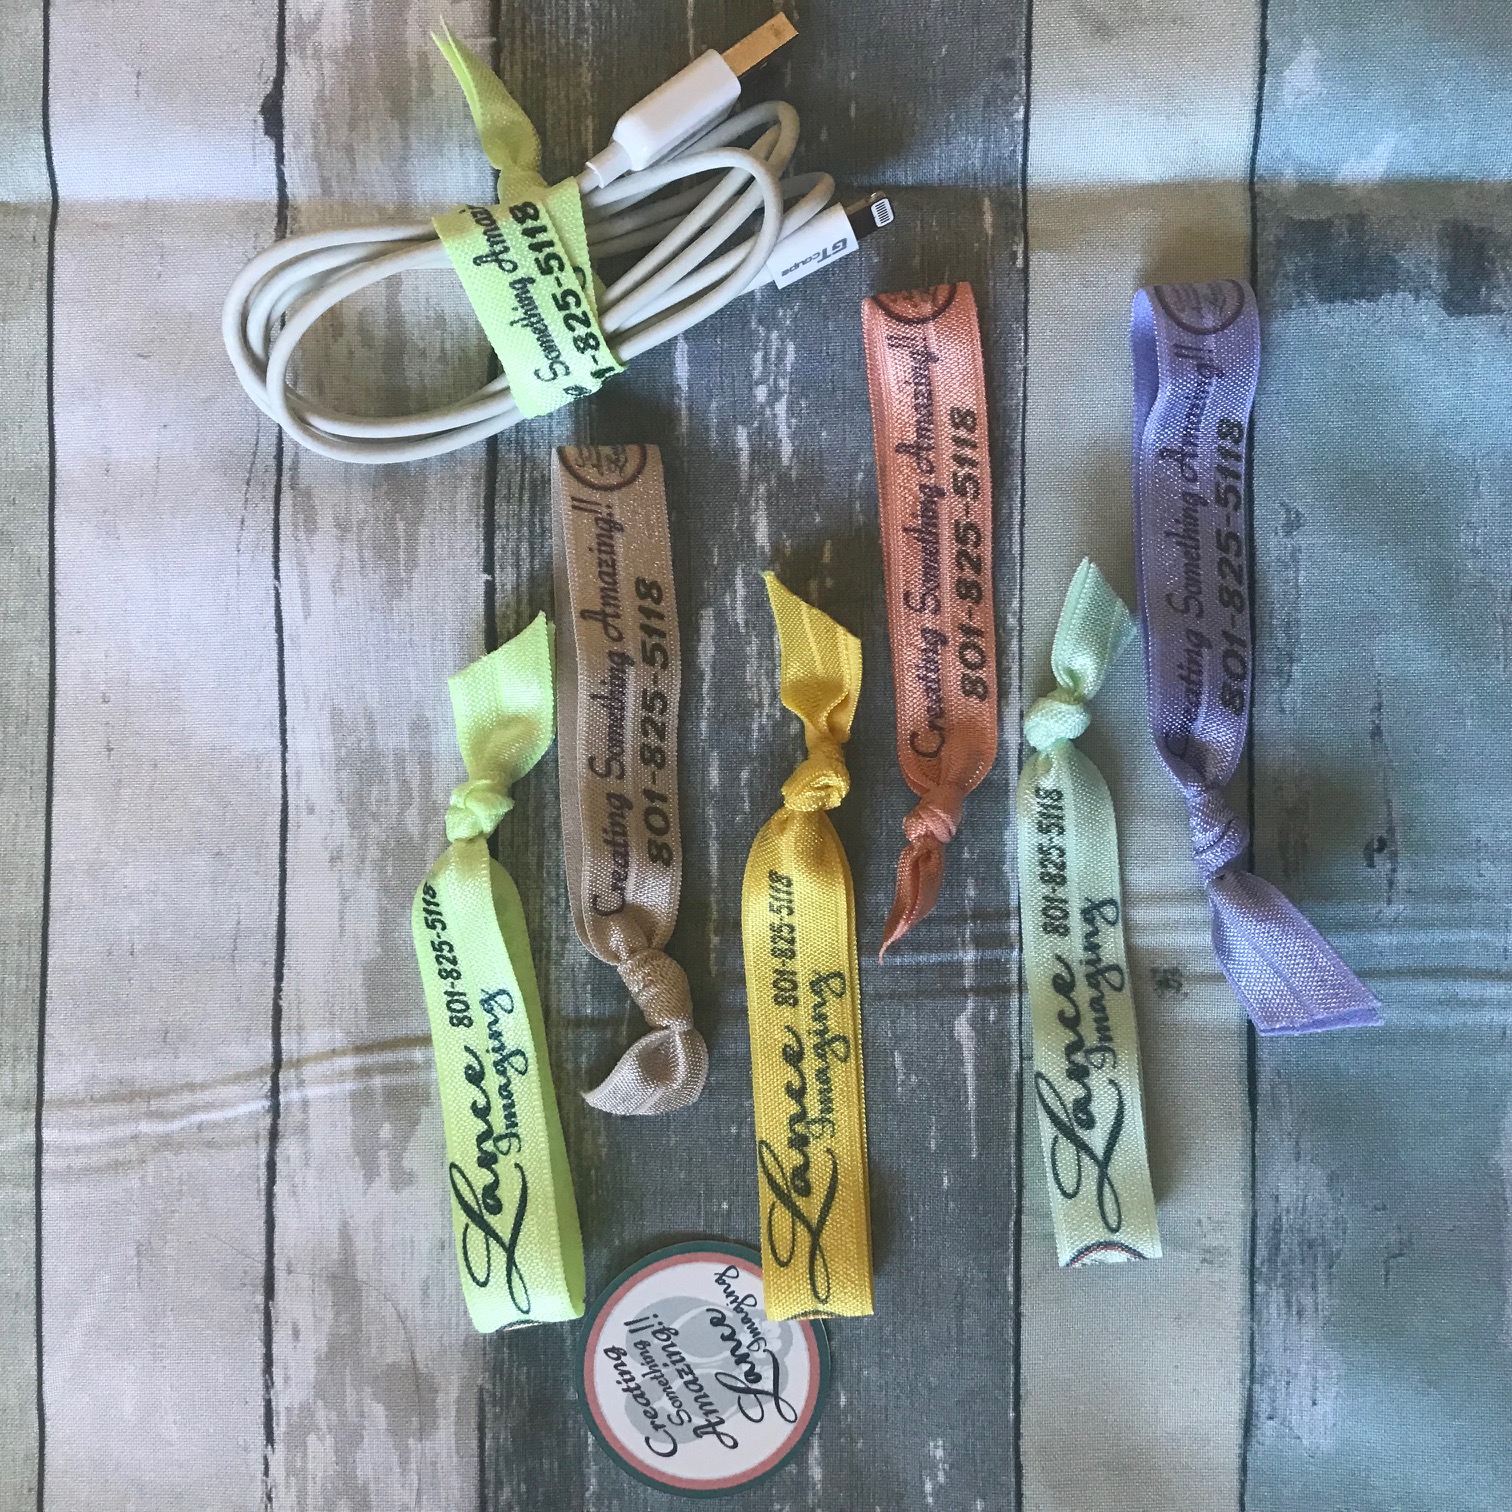 I made promotional hair ties and cord wraps to give away during events